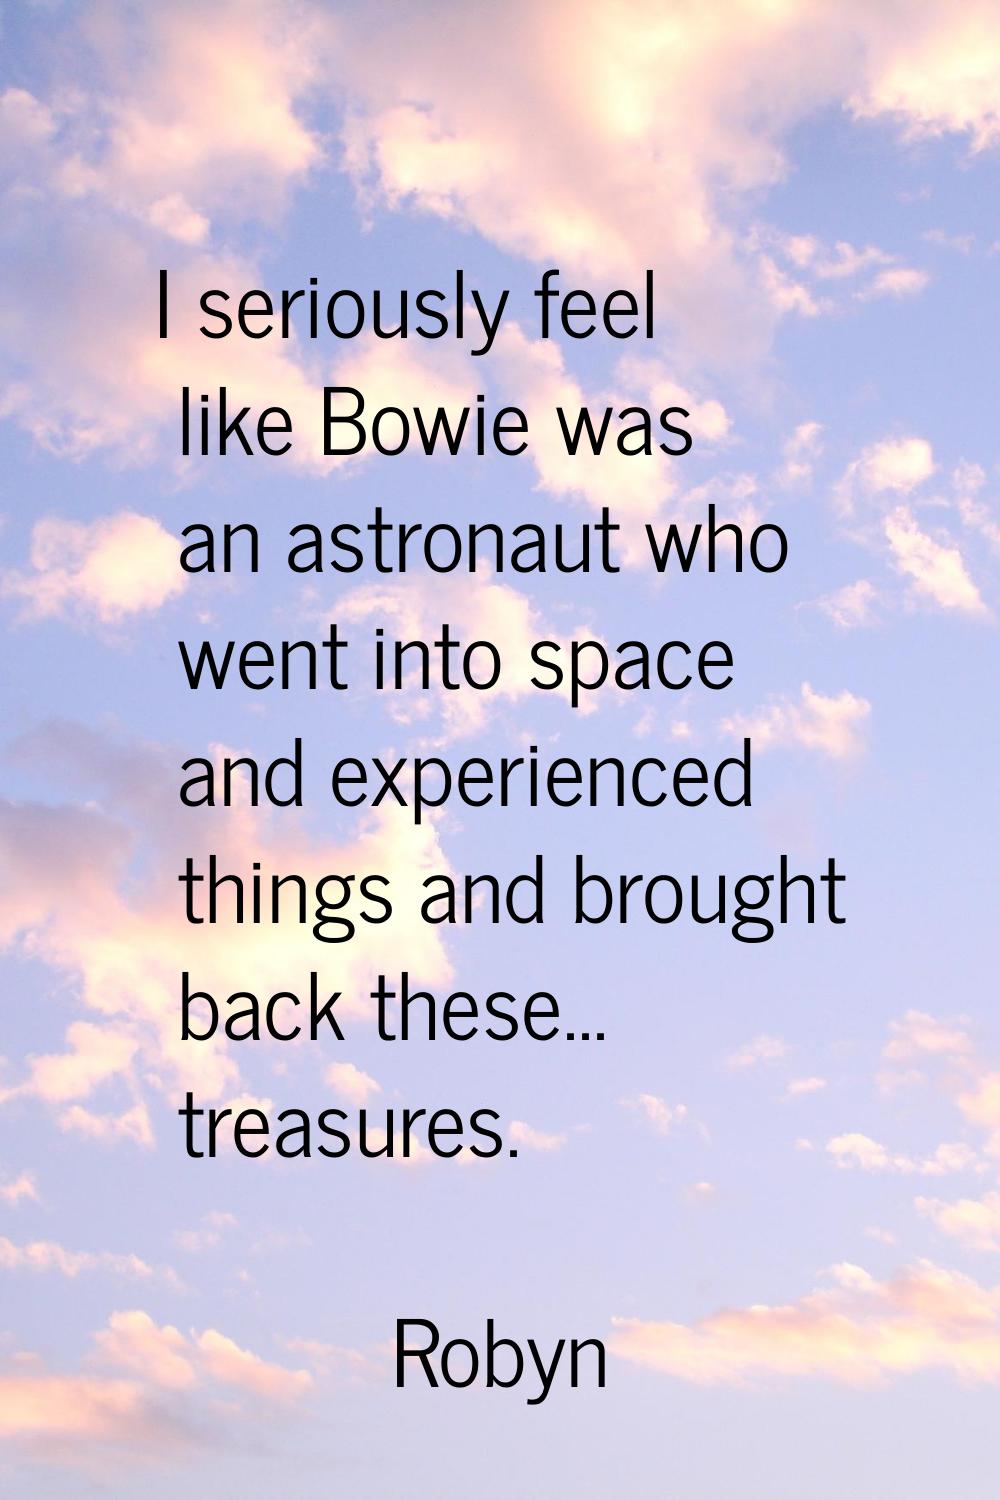 I seriously feel like Bowie was an astronaut who went into space and experienced things and brought